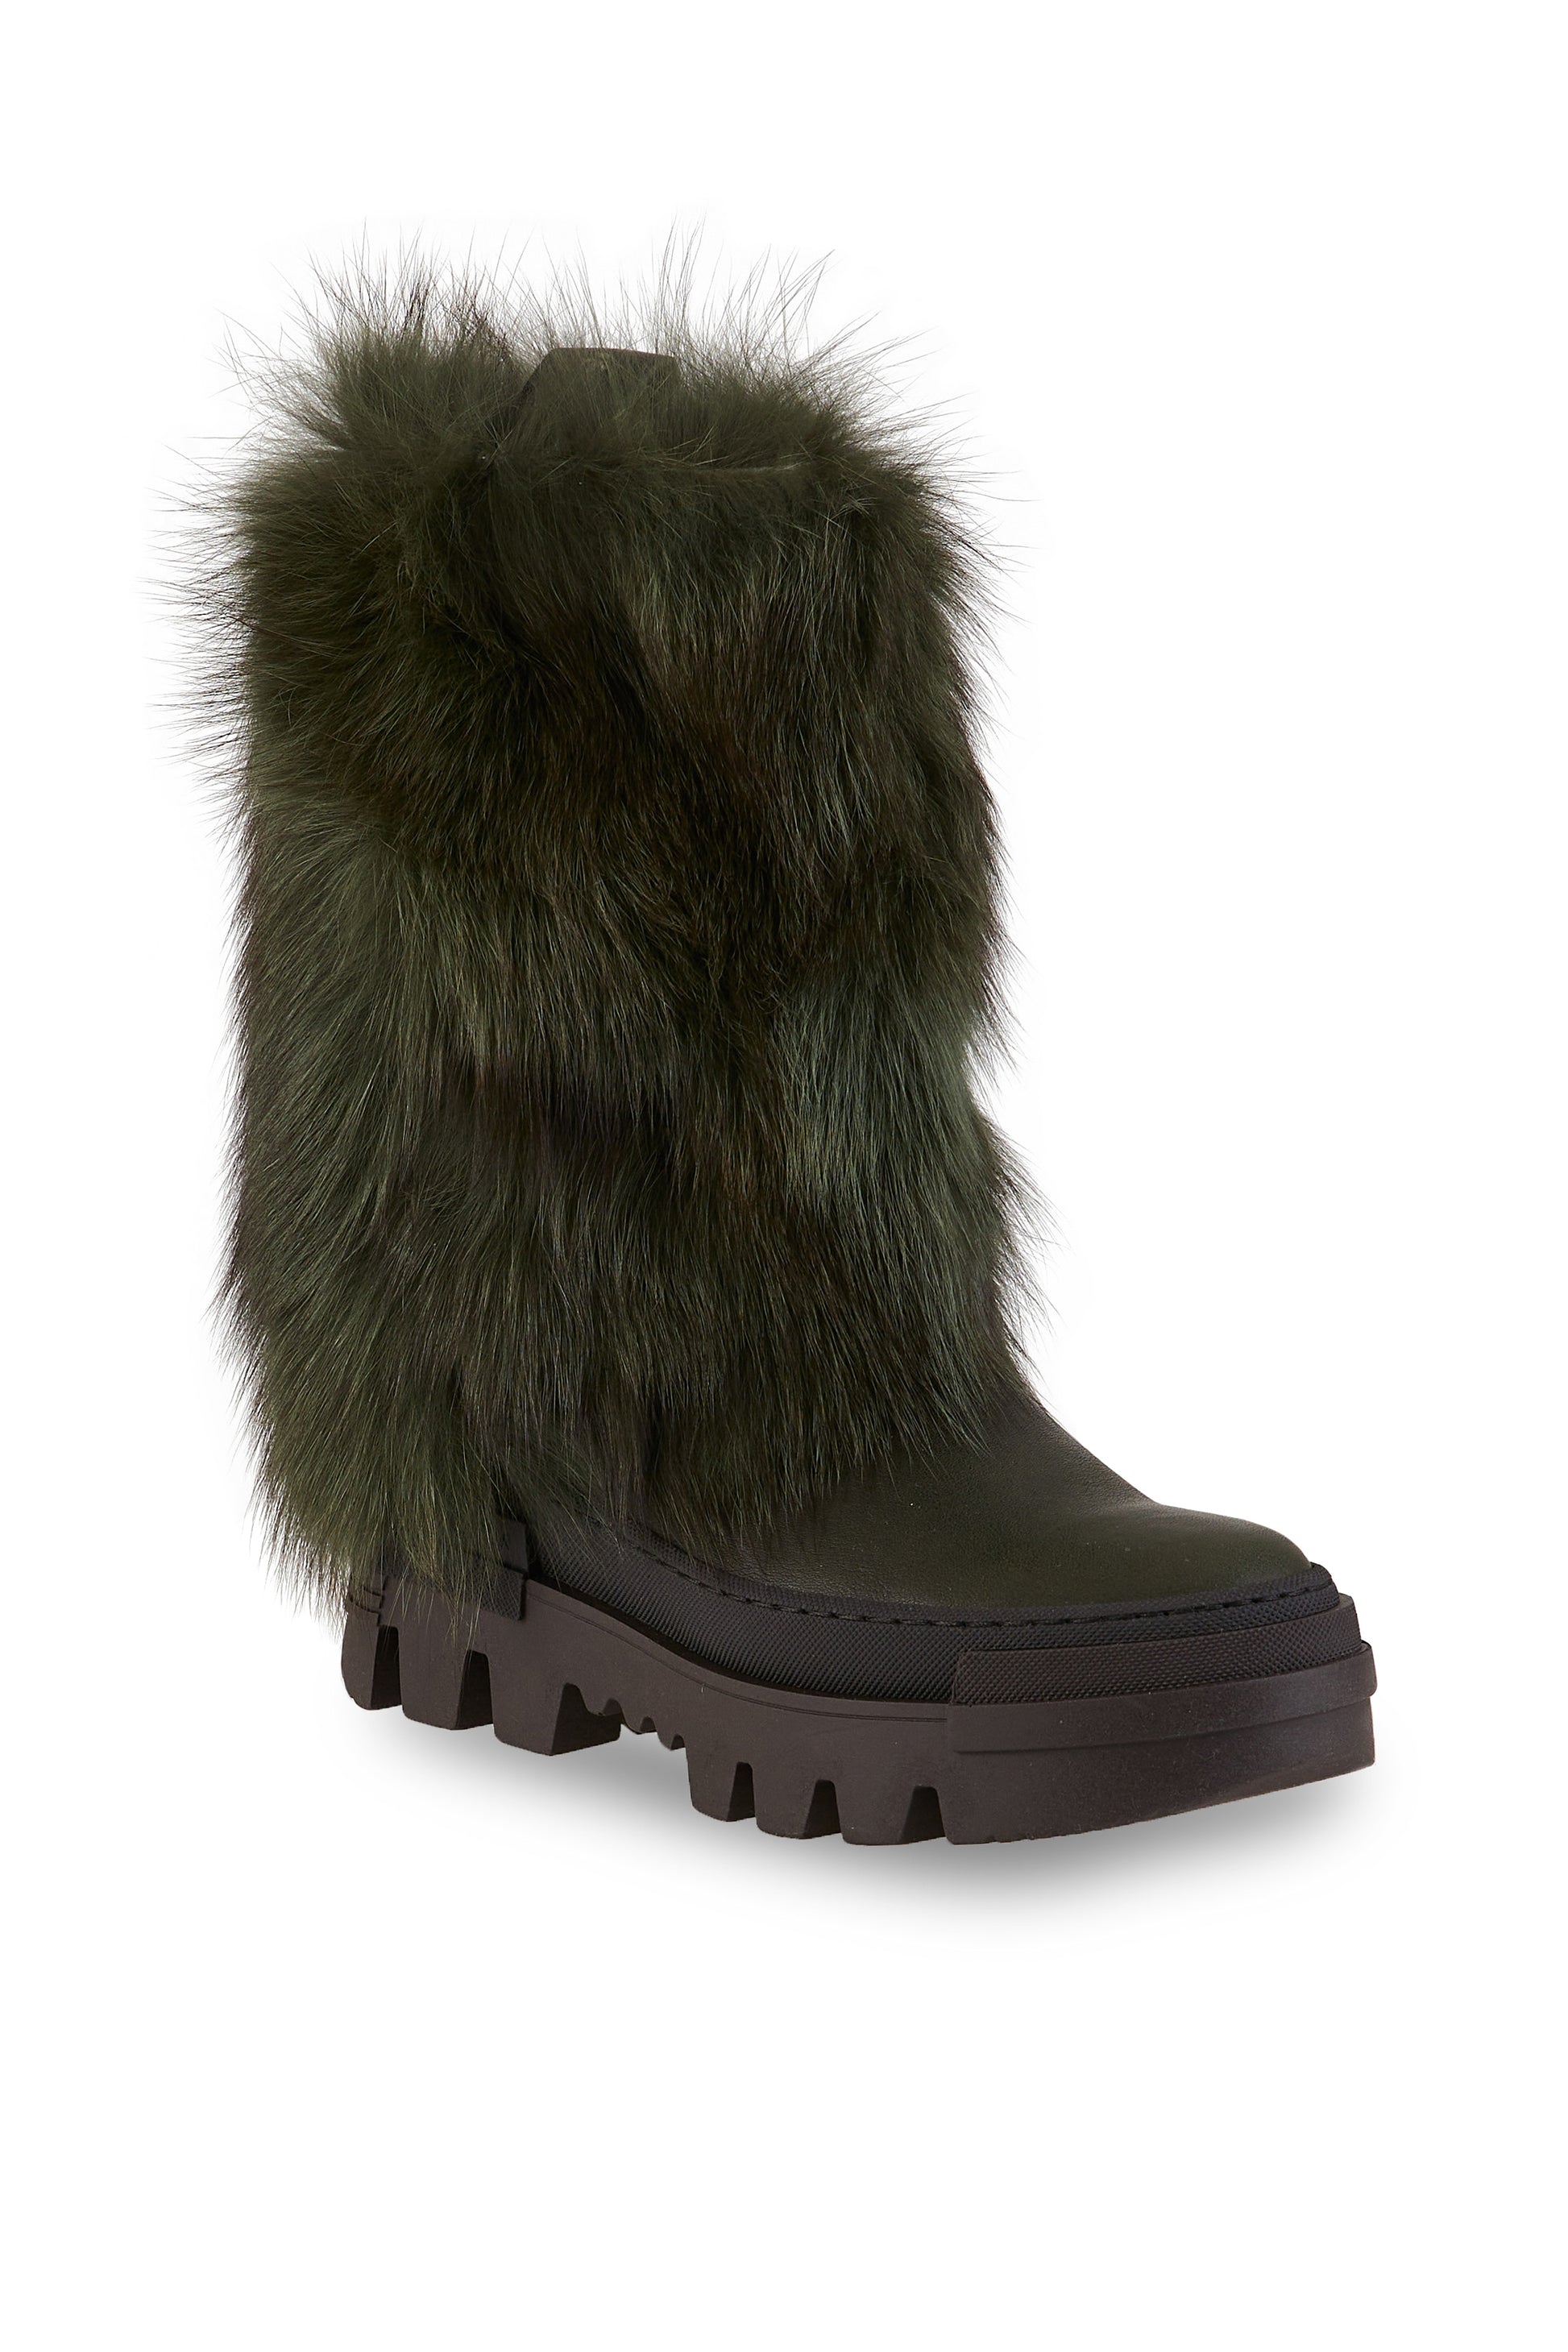 HENRY BEGUELIN Messico Tall Leather Boot With Long Fur in Menta